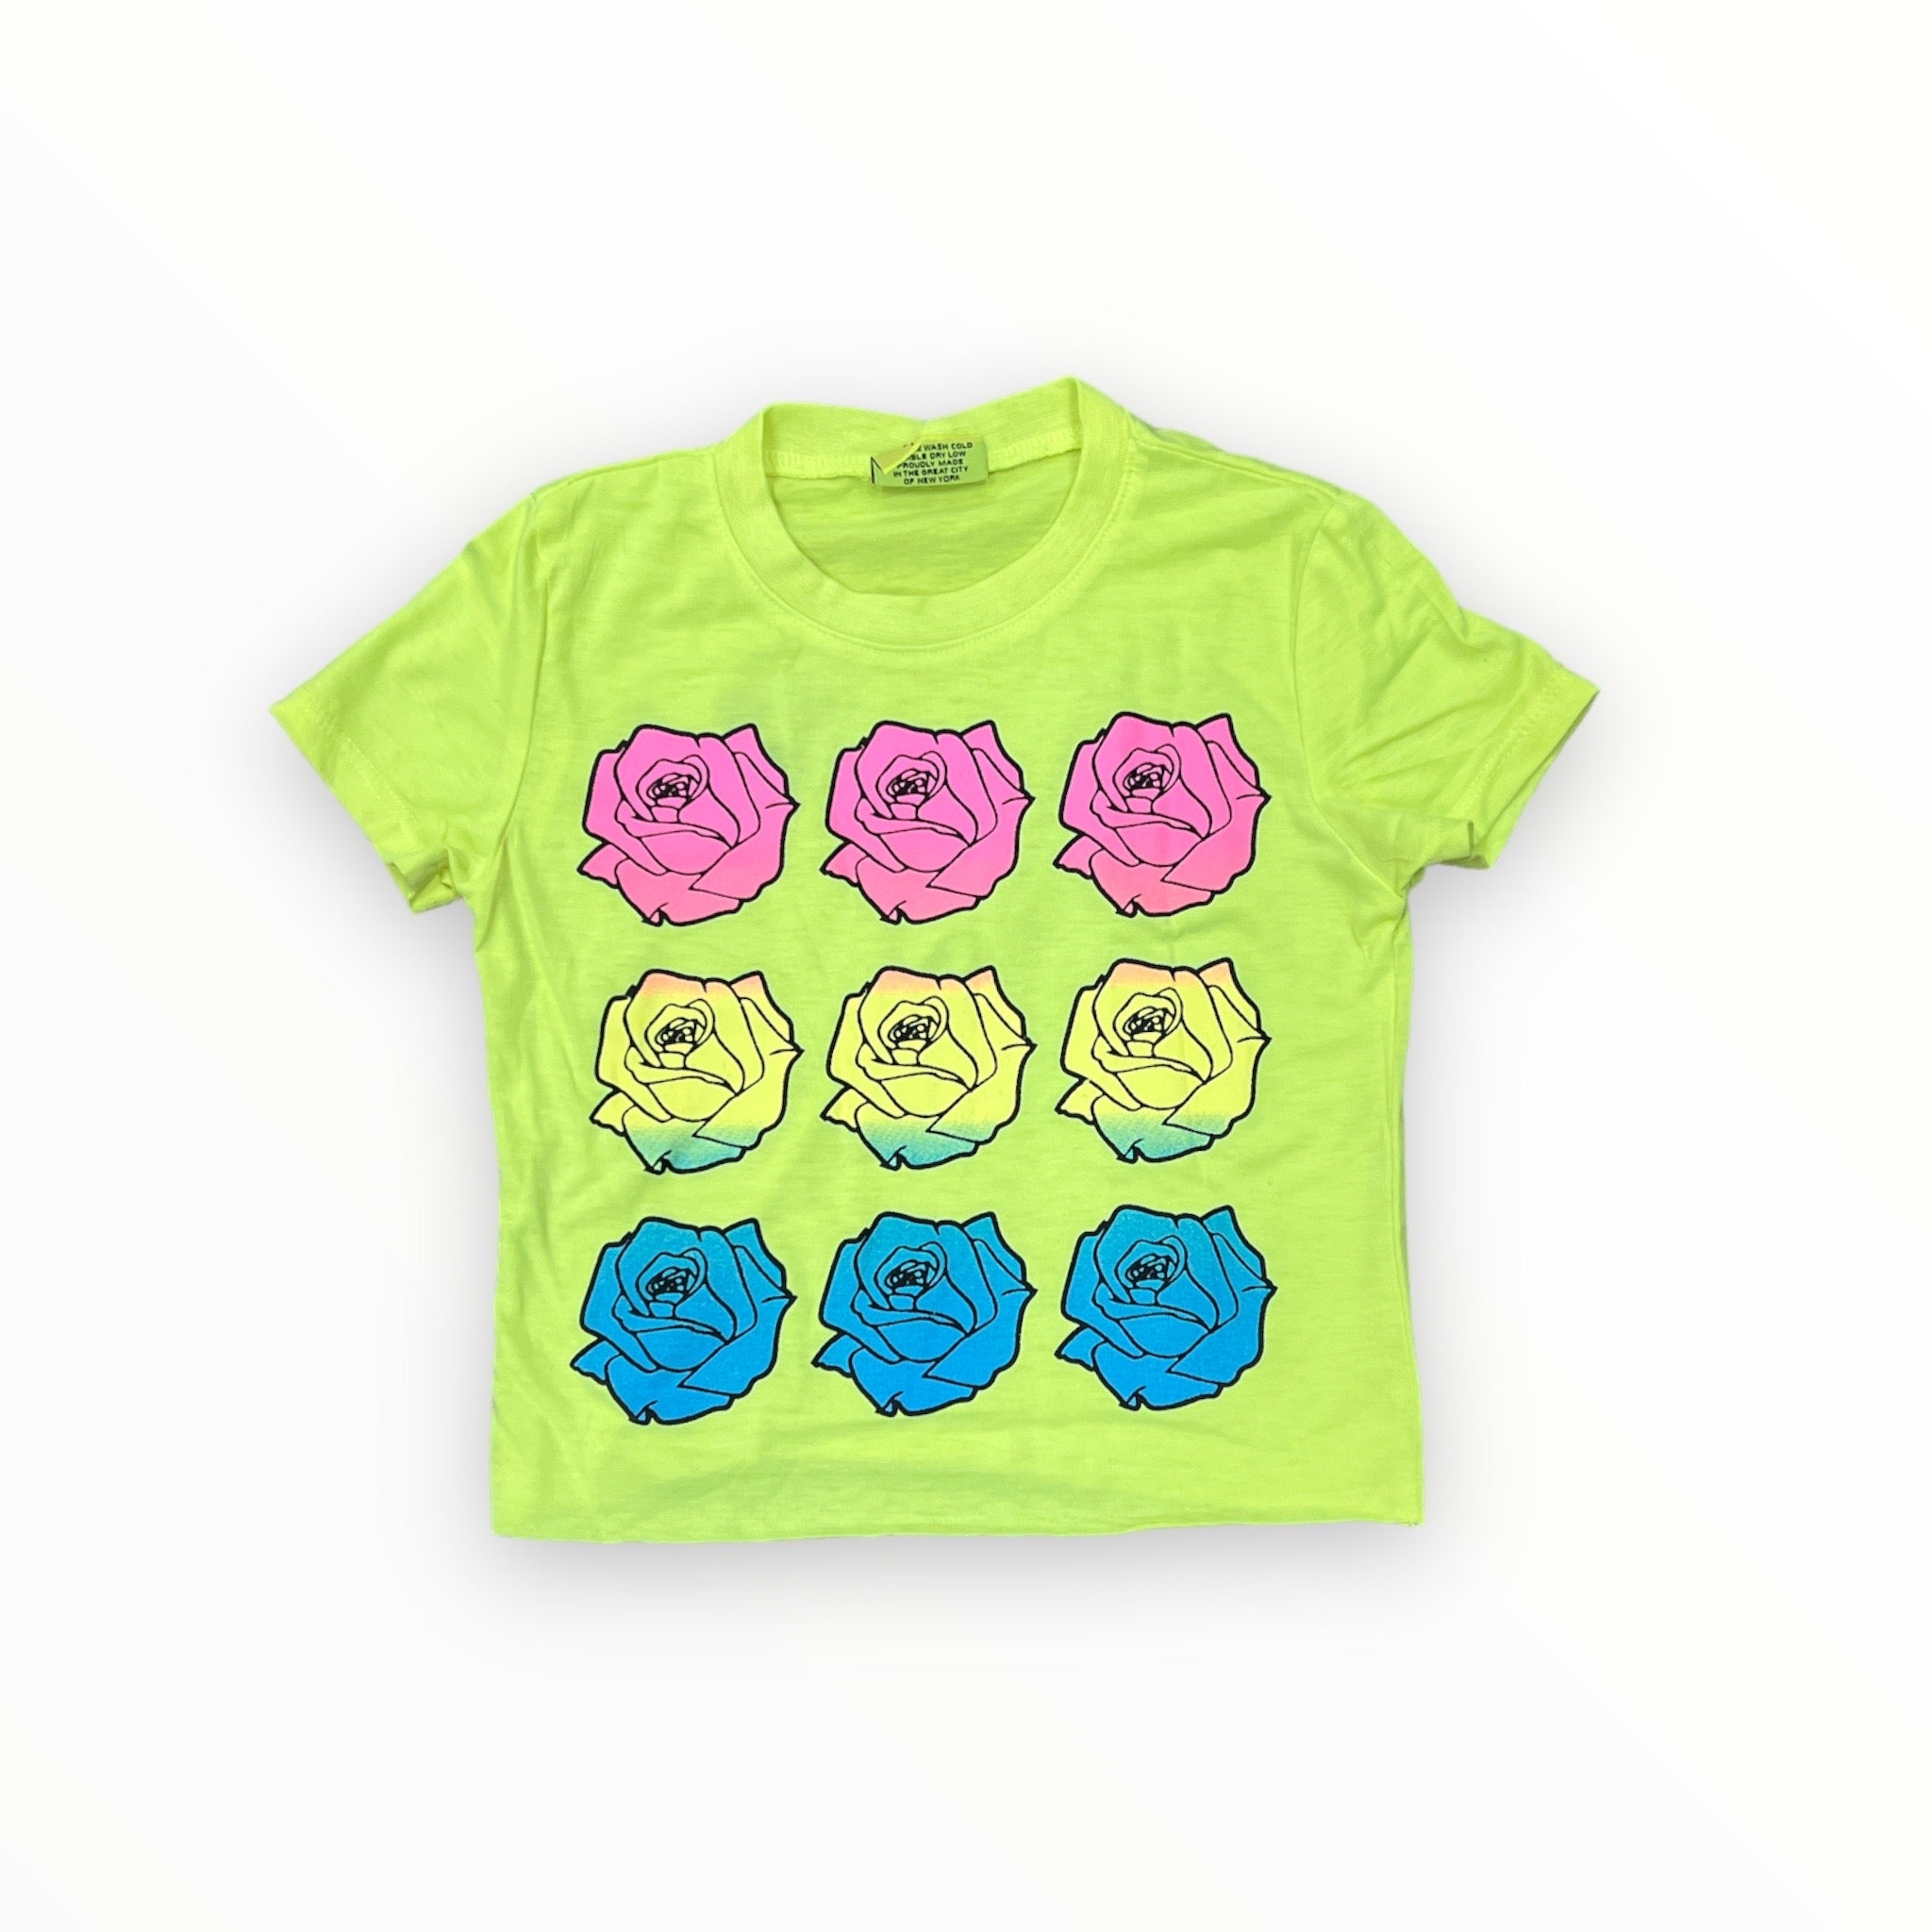 FIREHOUSE T-SHIRT - NEON YELLOW/ROSES